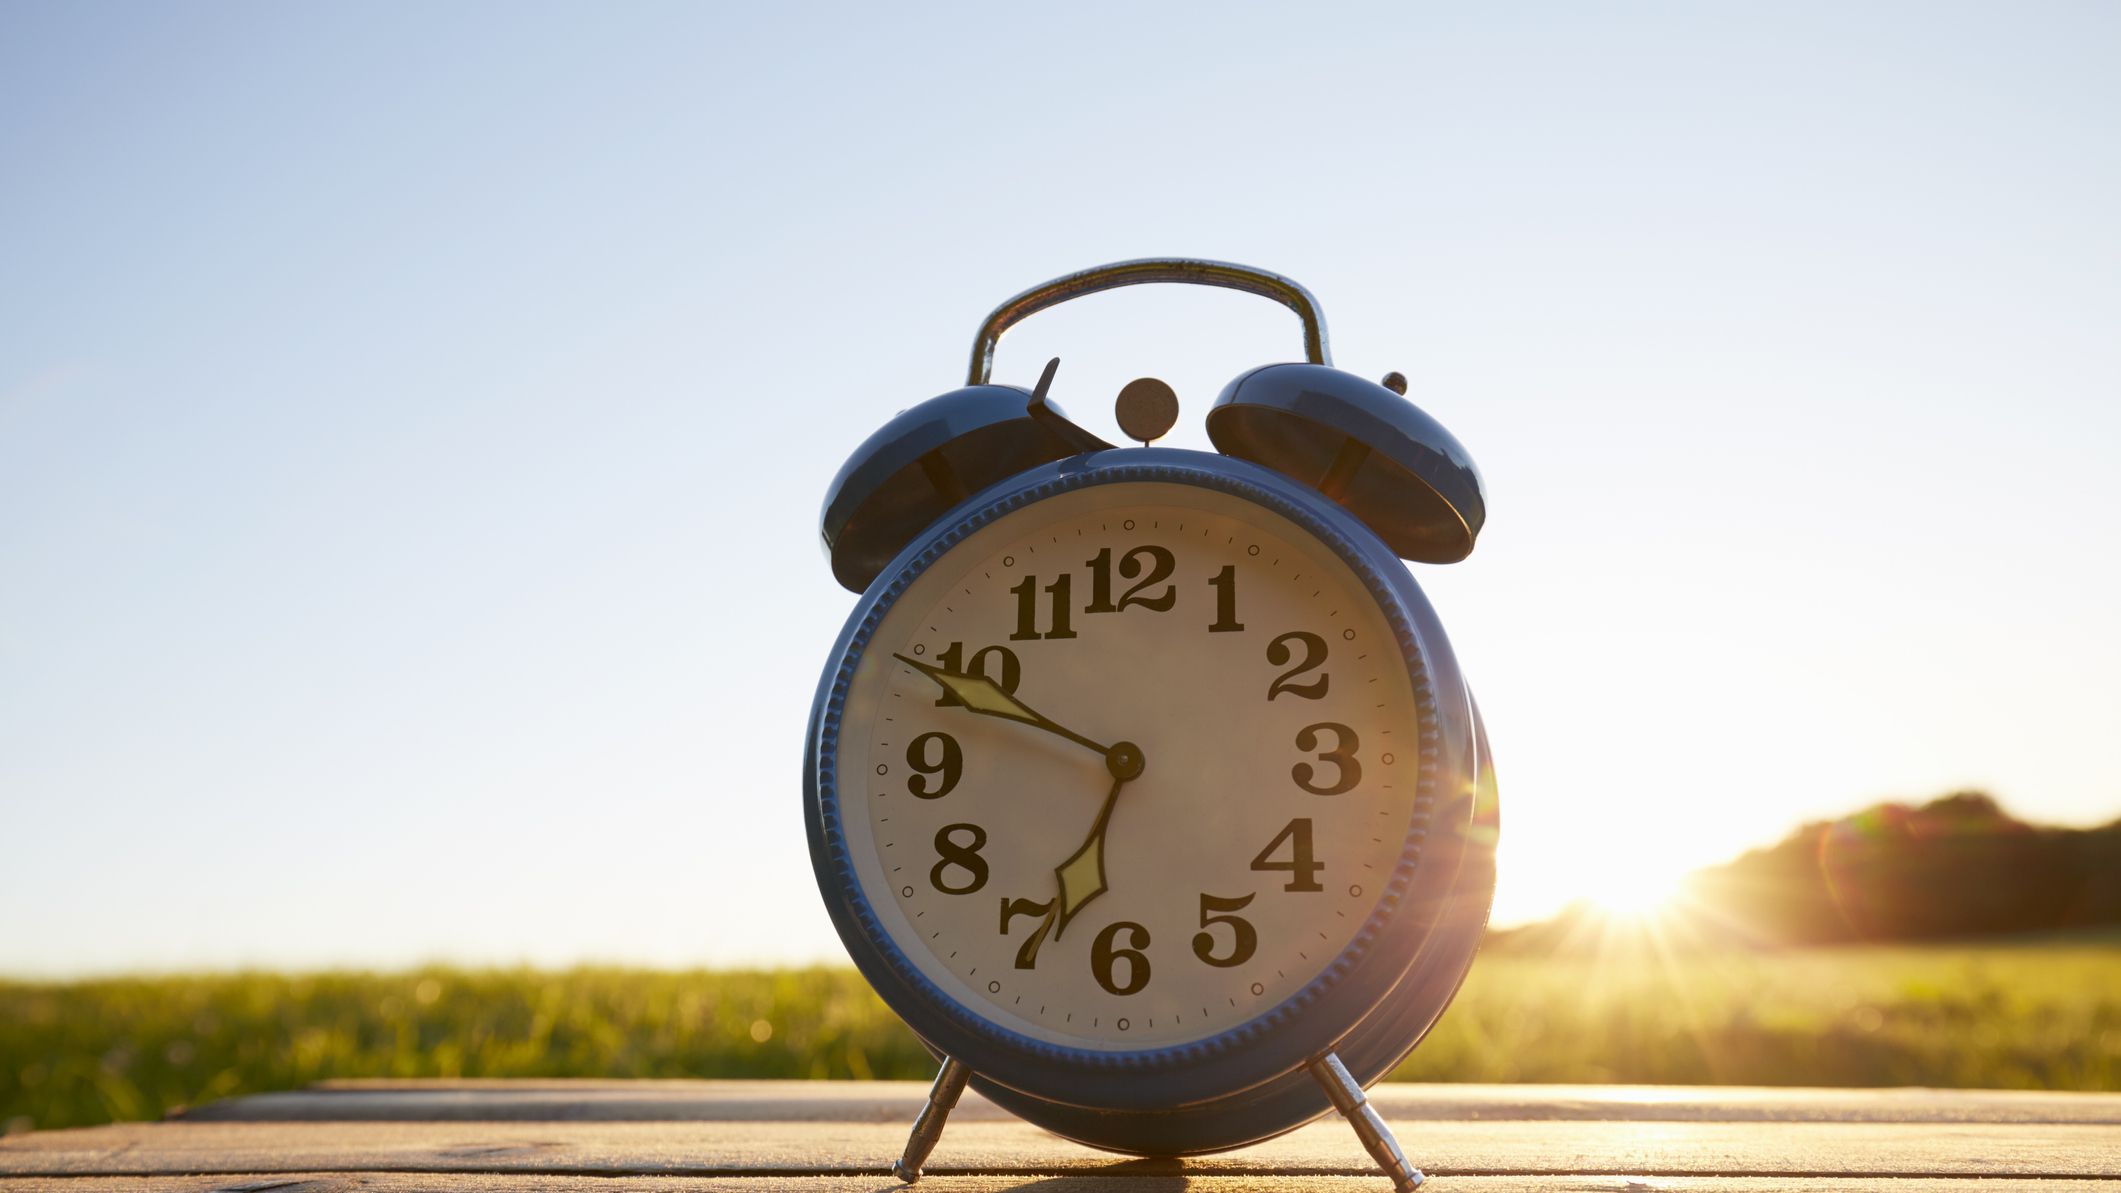 Daylight Saving Time is Ending. Here's How to Adjust to the Dark.